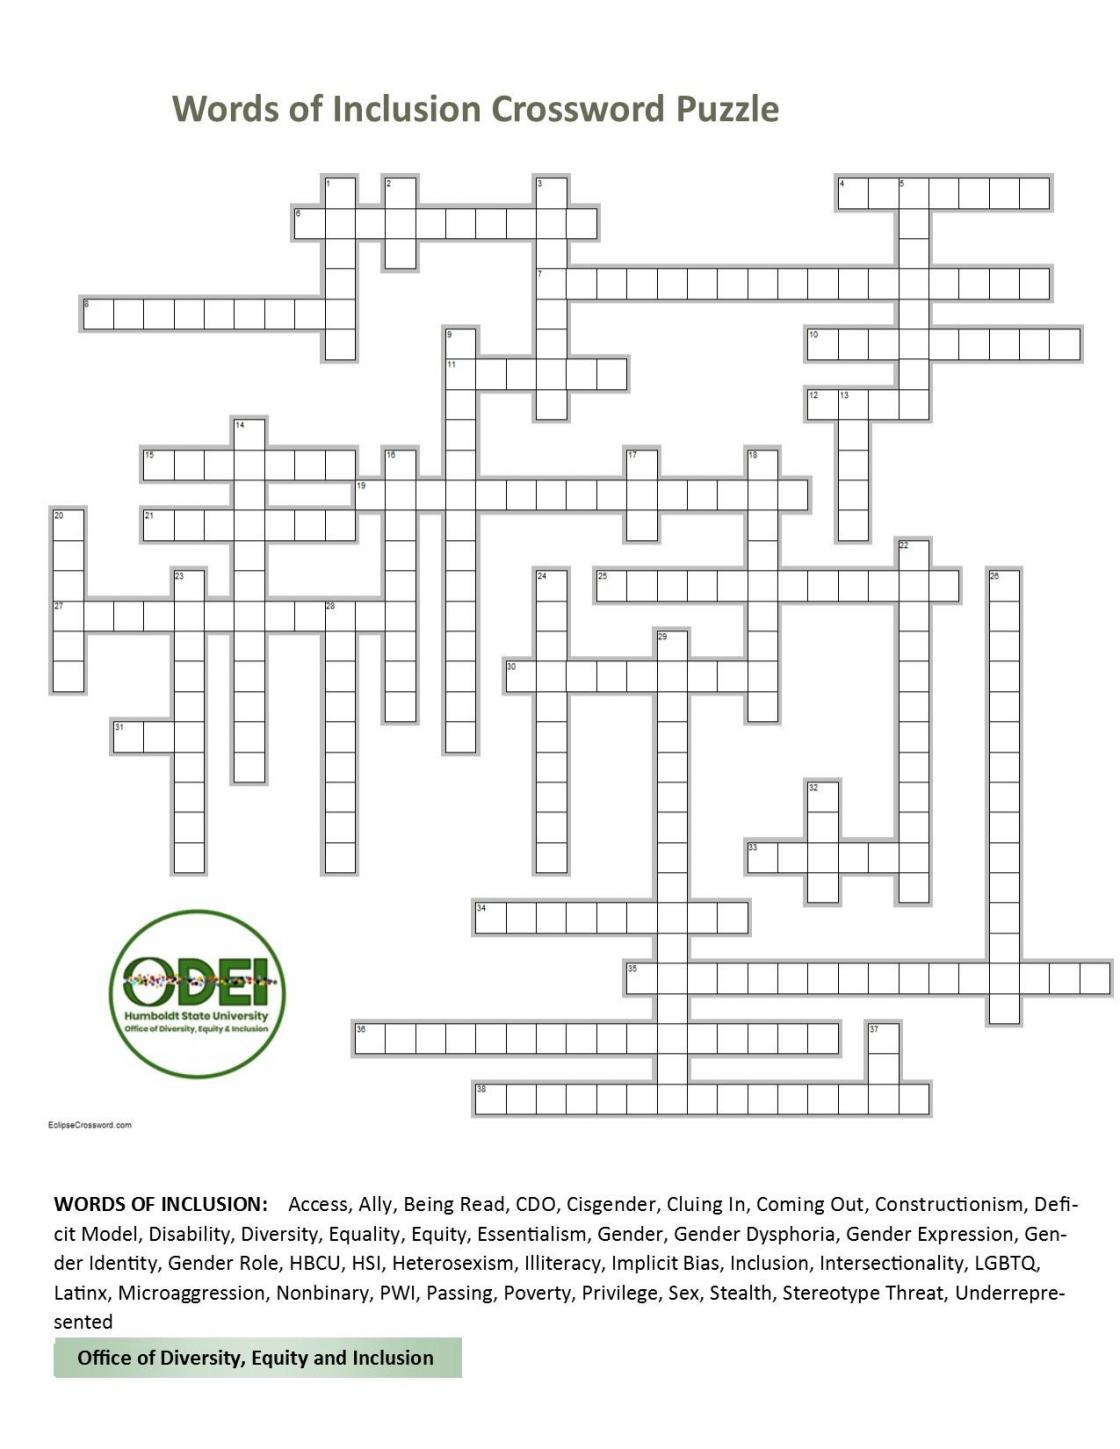 Words of Inclusion Crossword Puzzle Spring 2019 | Office of Diversity